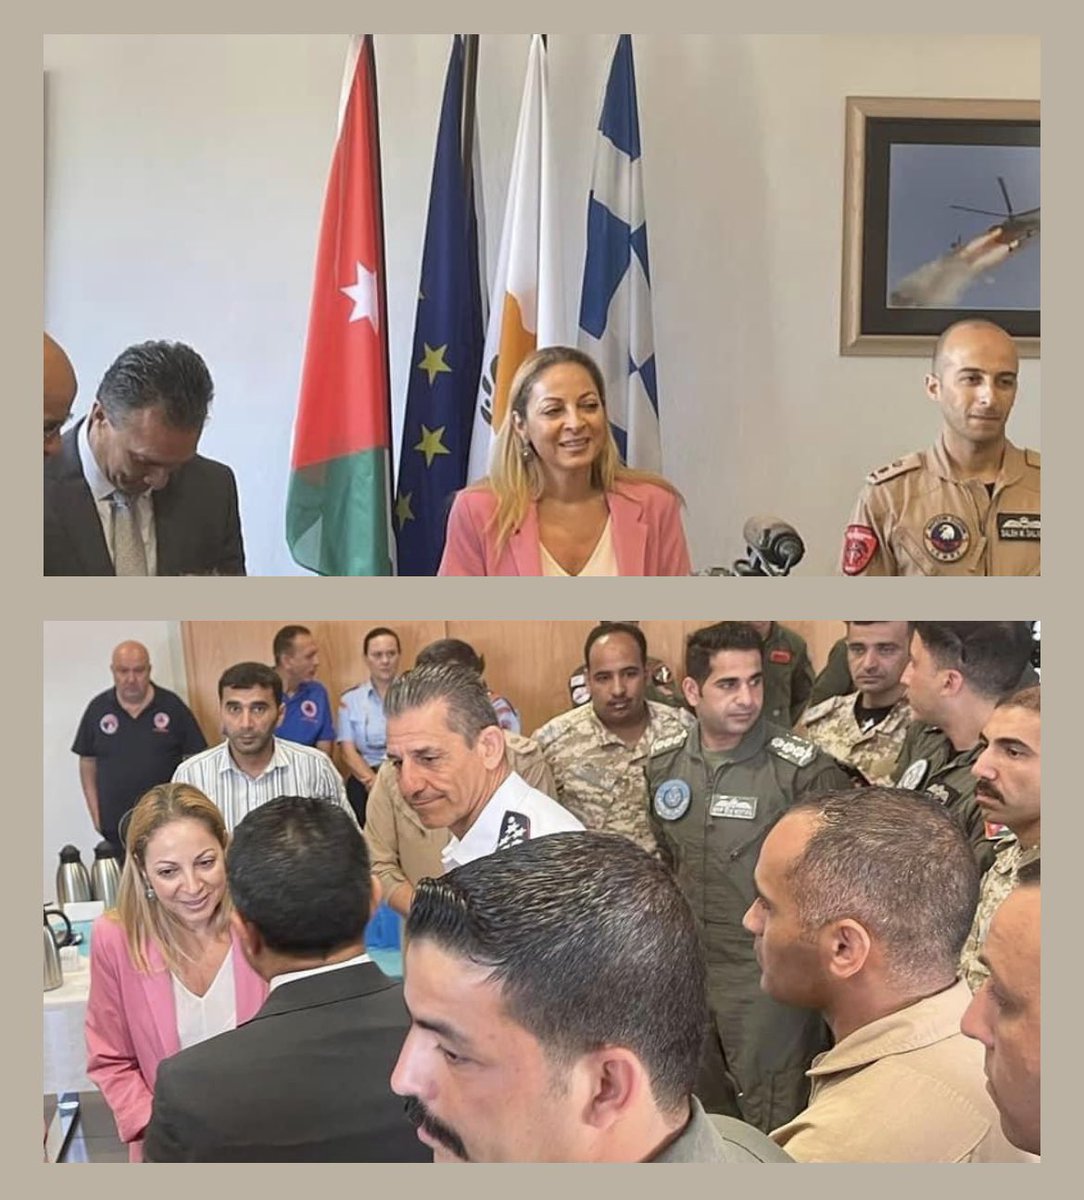 Memento from farewell get-together for #Jordanian #firefighting aircrews stepping in to assist #Cyprus in time of need. We reassured @JorEmbassyCy that  @MinJusticeCY @GovCyprus will reciprocate,if need be,looking forward to further #regionalcooperation 🇨🇾🇯🇴 #πυροσβεστικηυπηρεσια